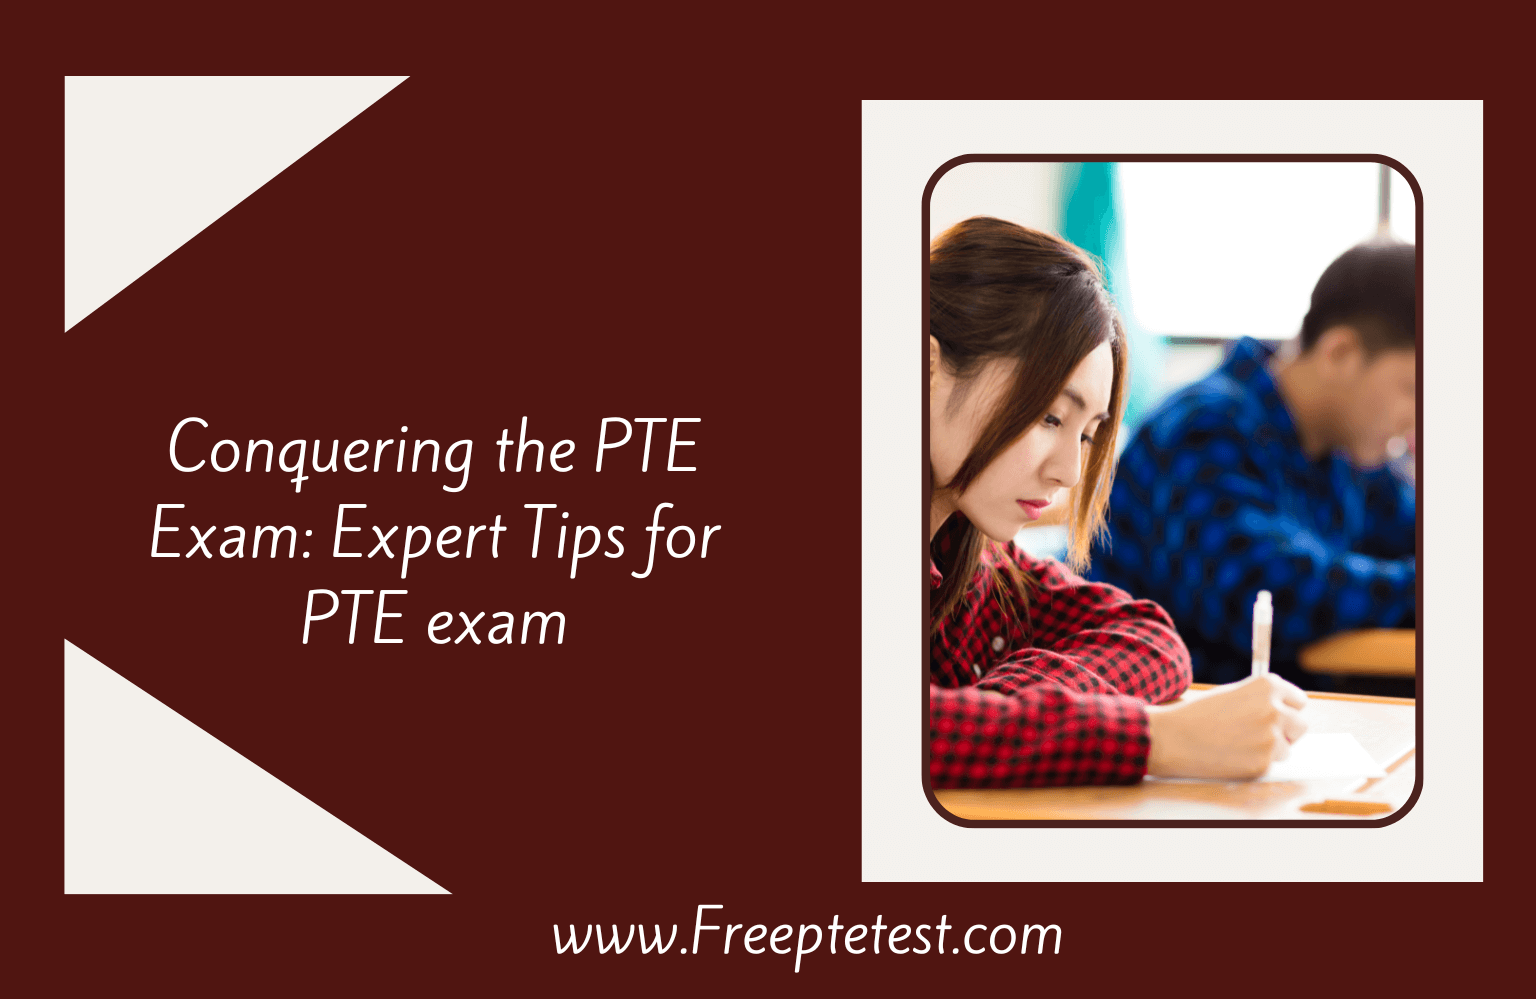 Conquering the PTE Exam: Expert Tips for PTE exam